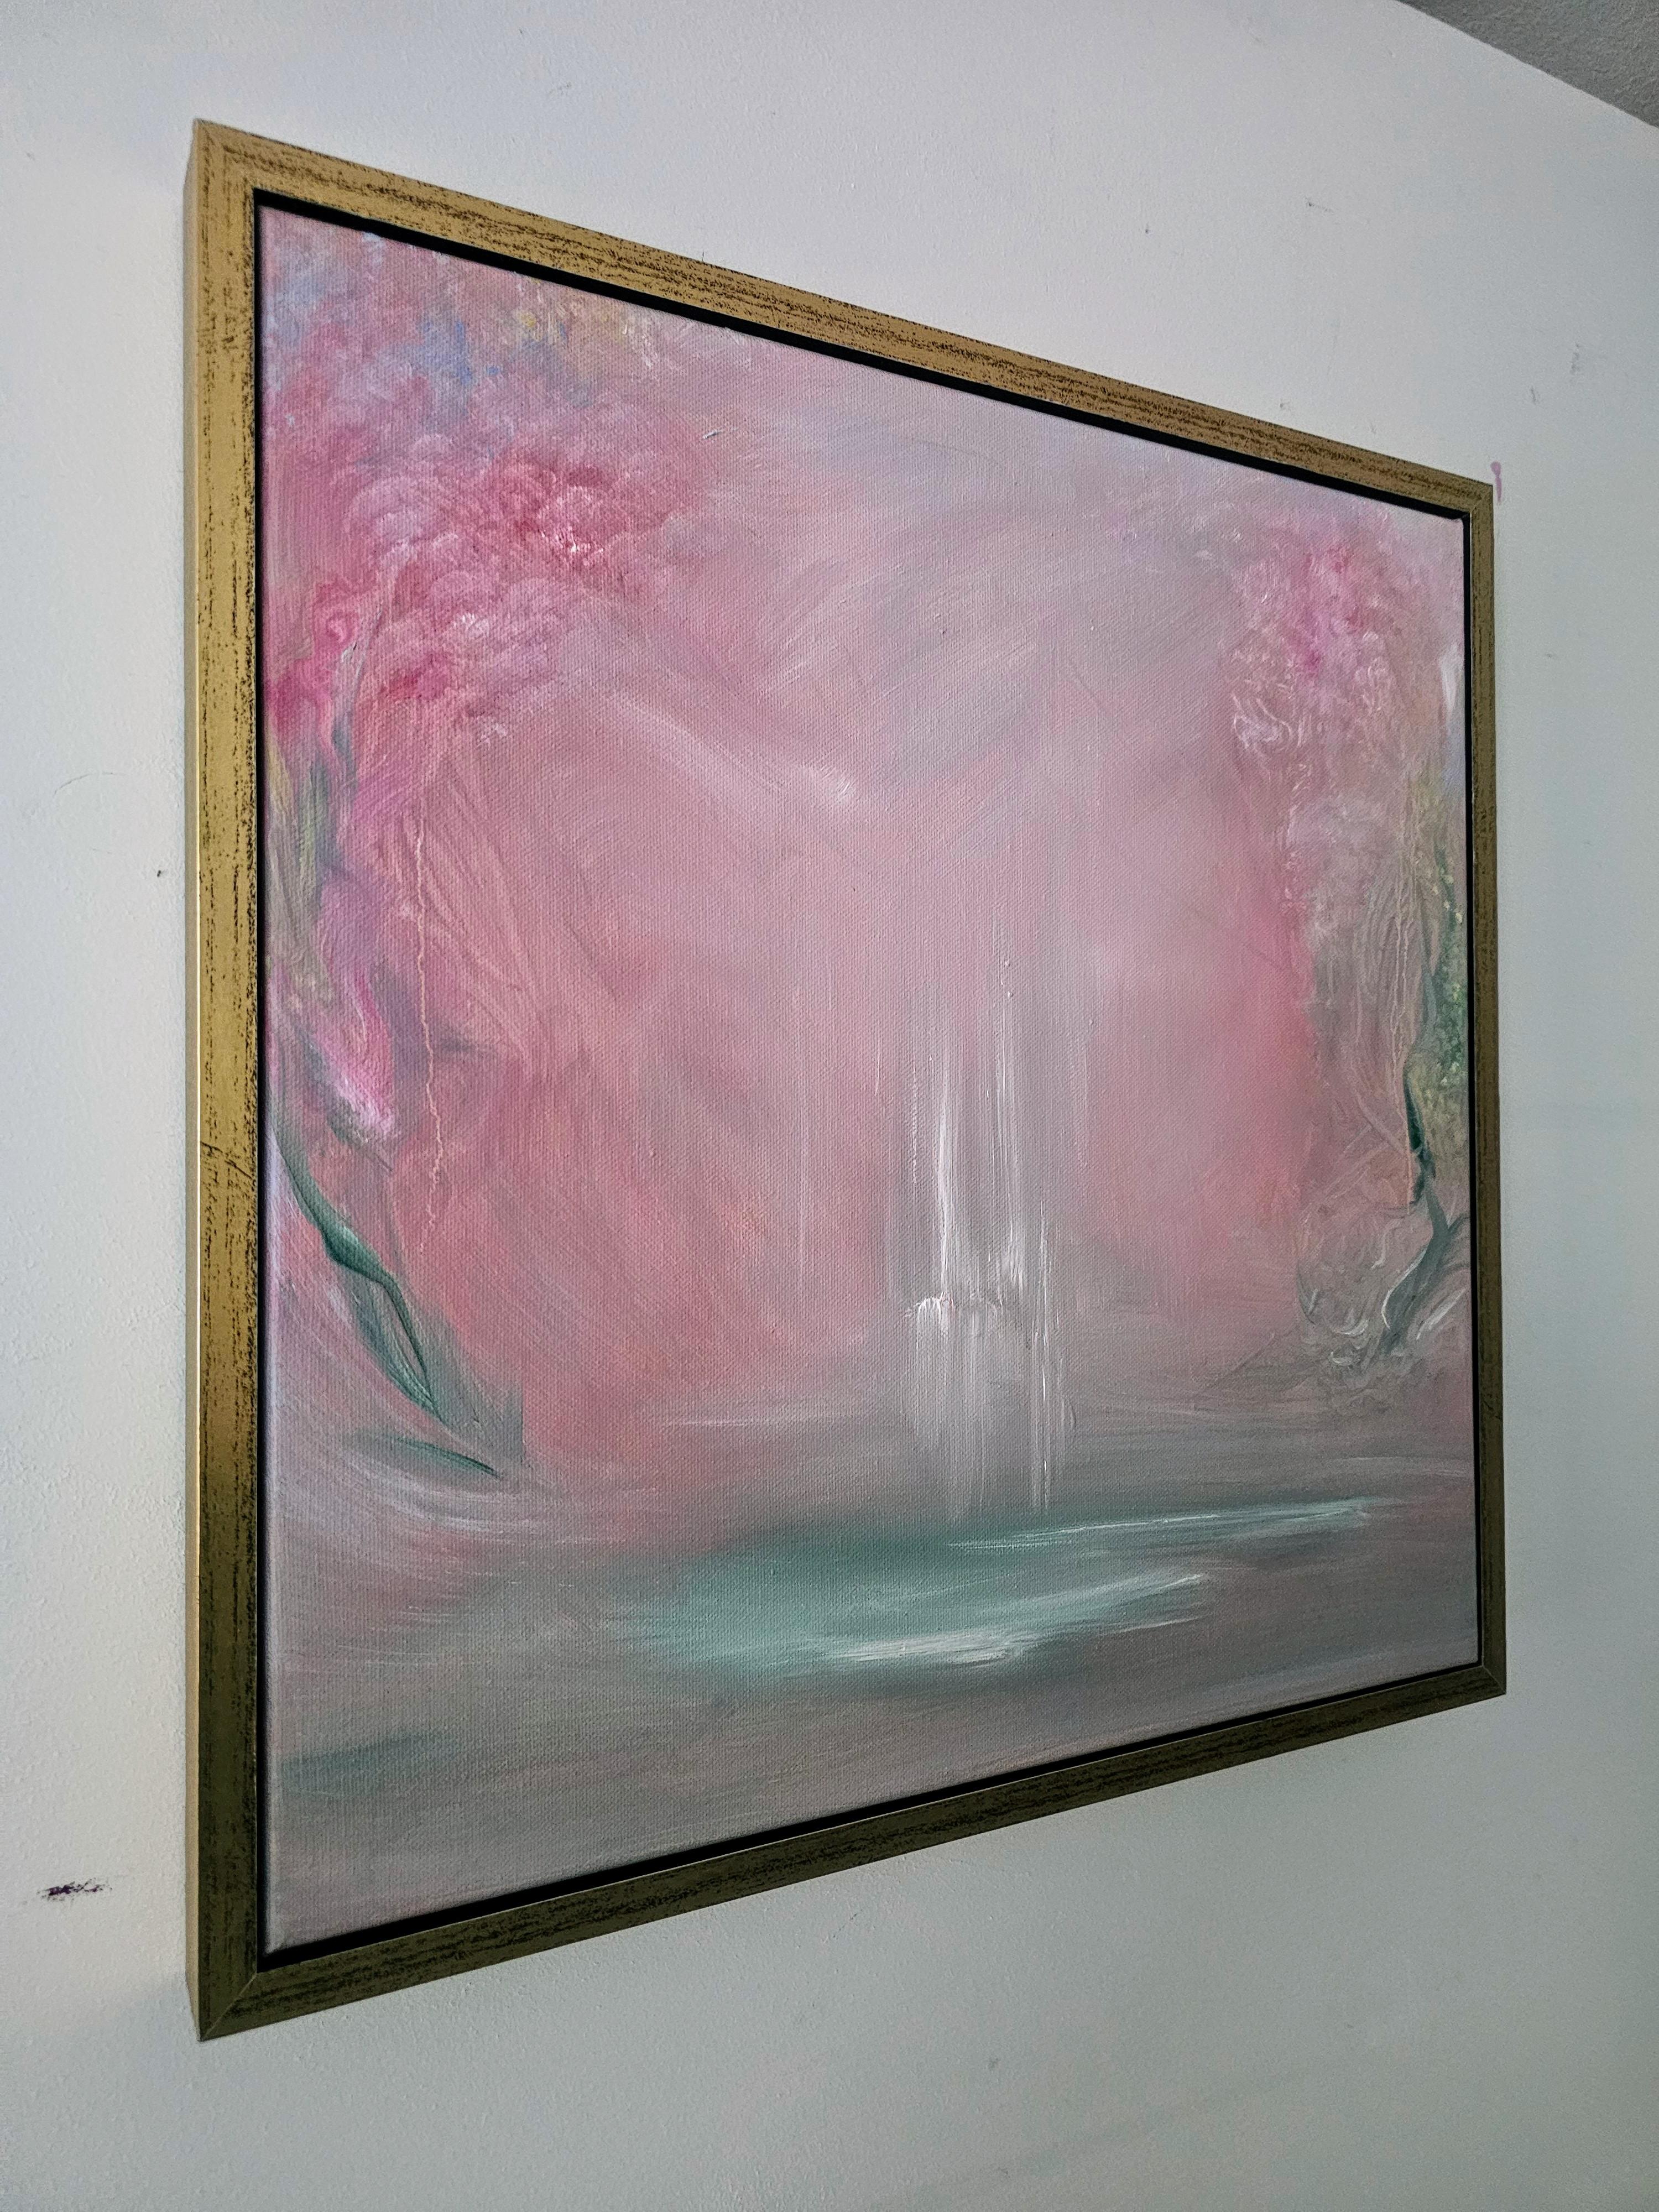 Water baby - Framed pink abstract floral nature painting - Gray Abstract Painting by Jennifer L. Baker